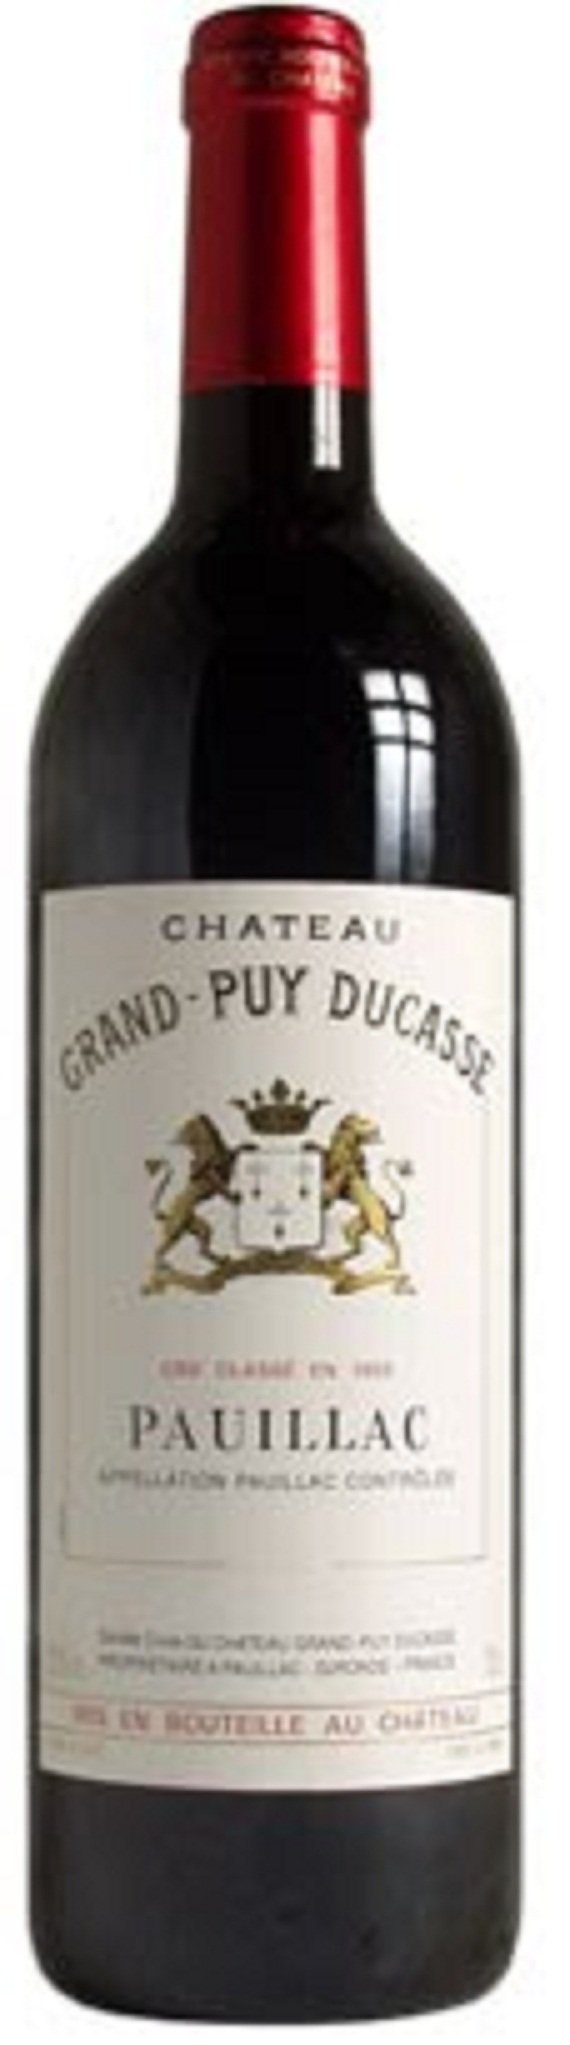 Prelude A Grand-Puy Ducasse Pauillac 2016